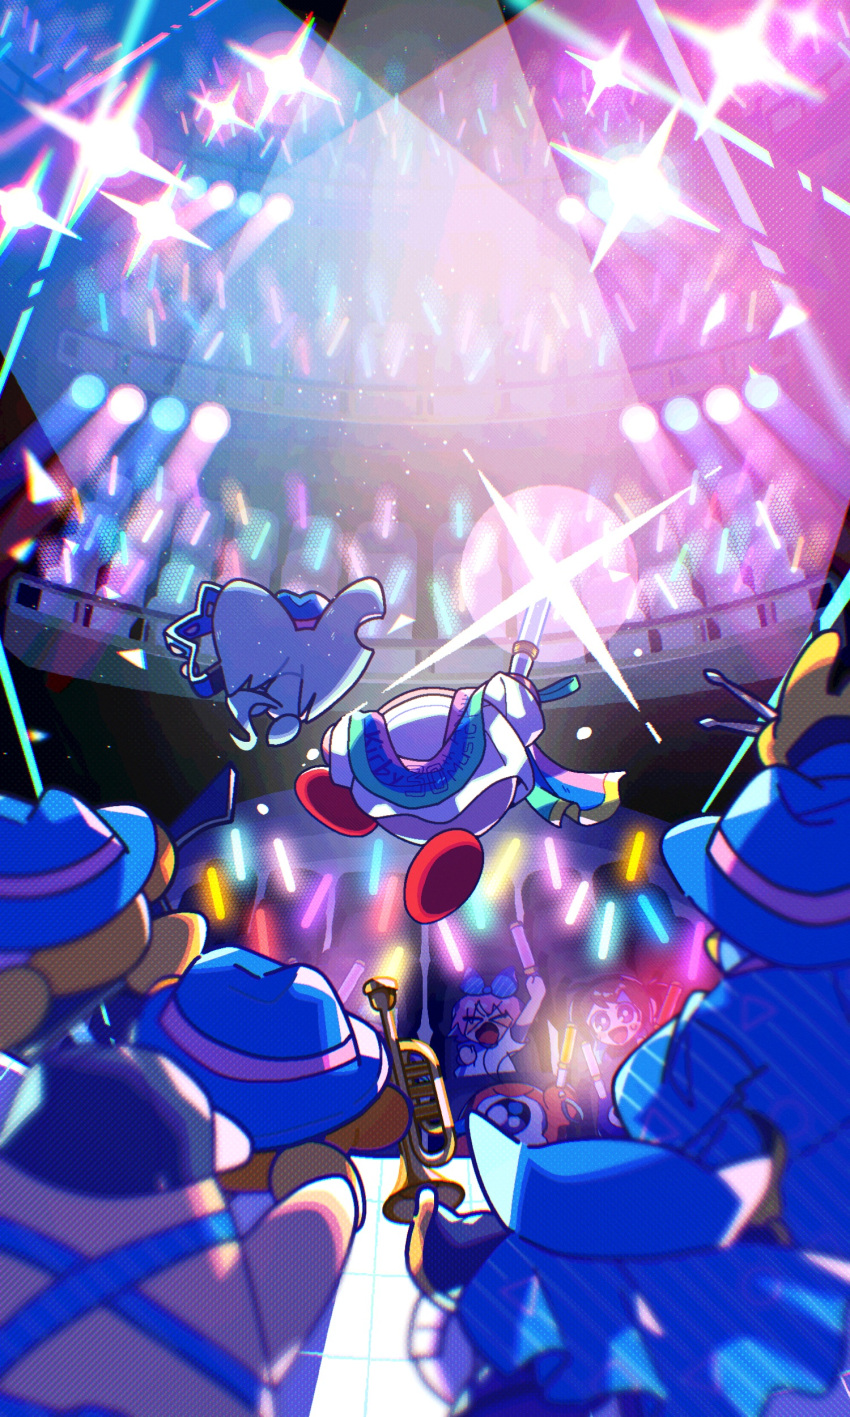 0tamt0 1other 2girls 4boys absurdres adeleine armor audience baseball_cap blue_headwear cape chef_kawasaki commentary_request elfilin gooey_(kirby) hat highres holding_glowstick instrument king_dedede kirby kirby_(series) kirby_30th_anniversary_music_festival meta_knight multiple_girls notched_ear one-eyed pauldrons ribbon_(kirby) shoulder_armor sparkle stage_lights towel trumpet waddle_dee waddle_doo